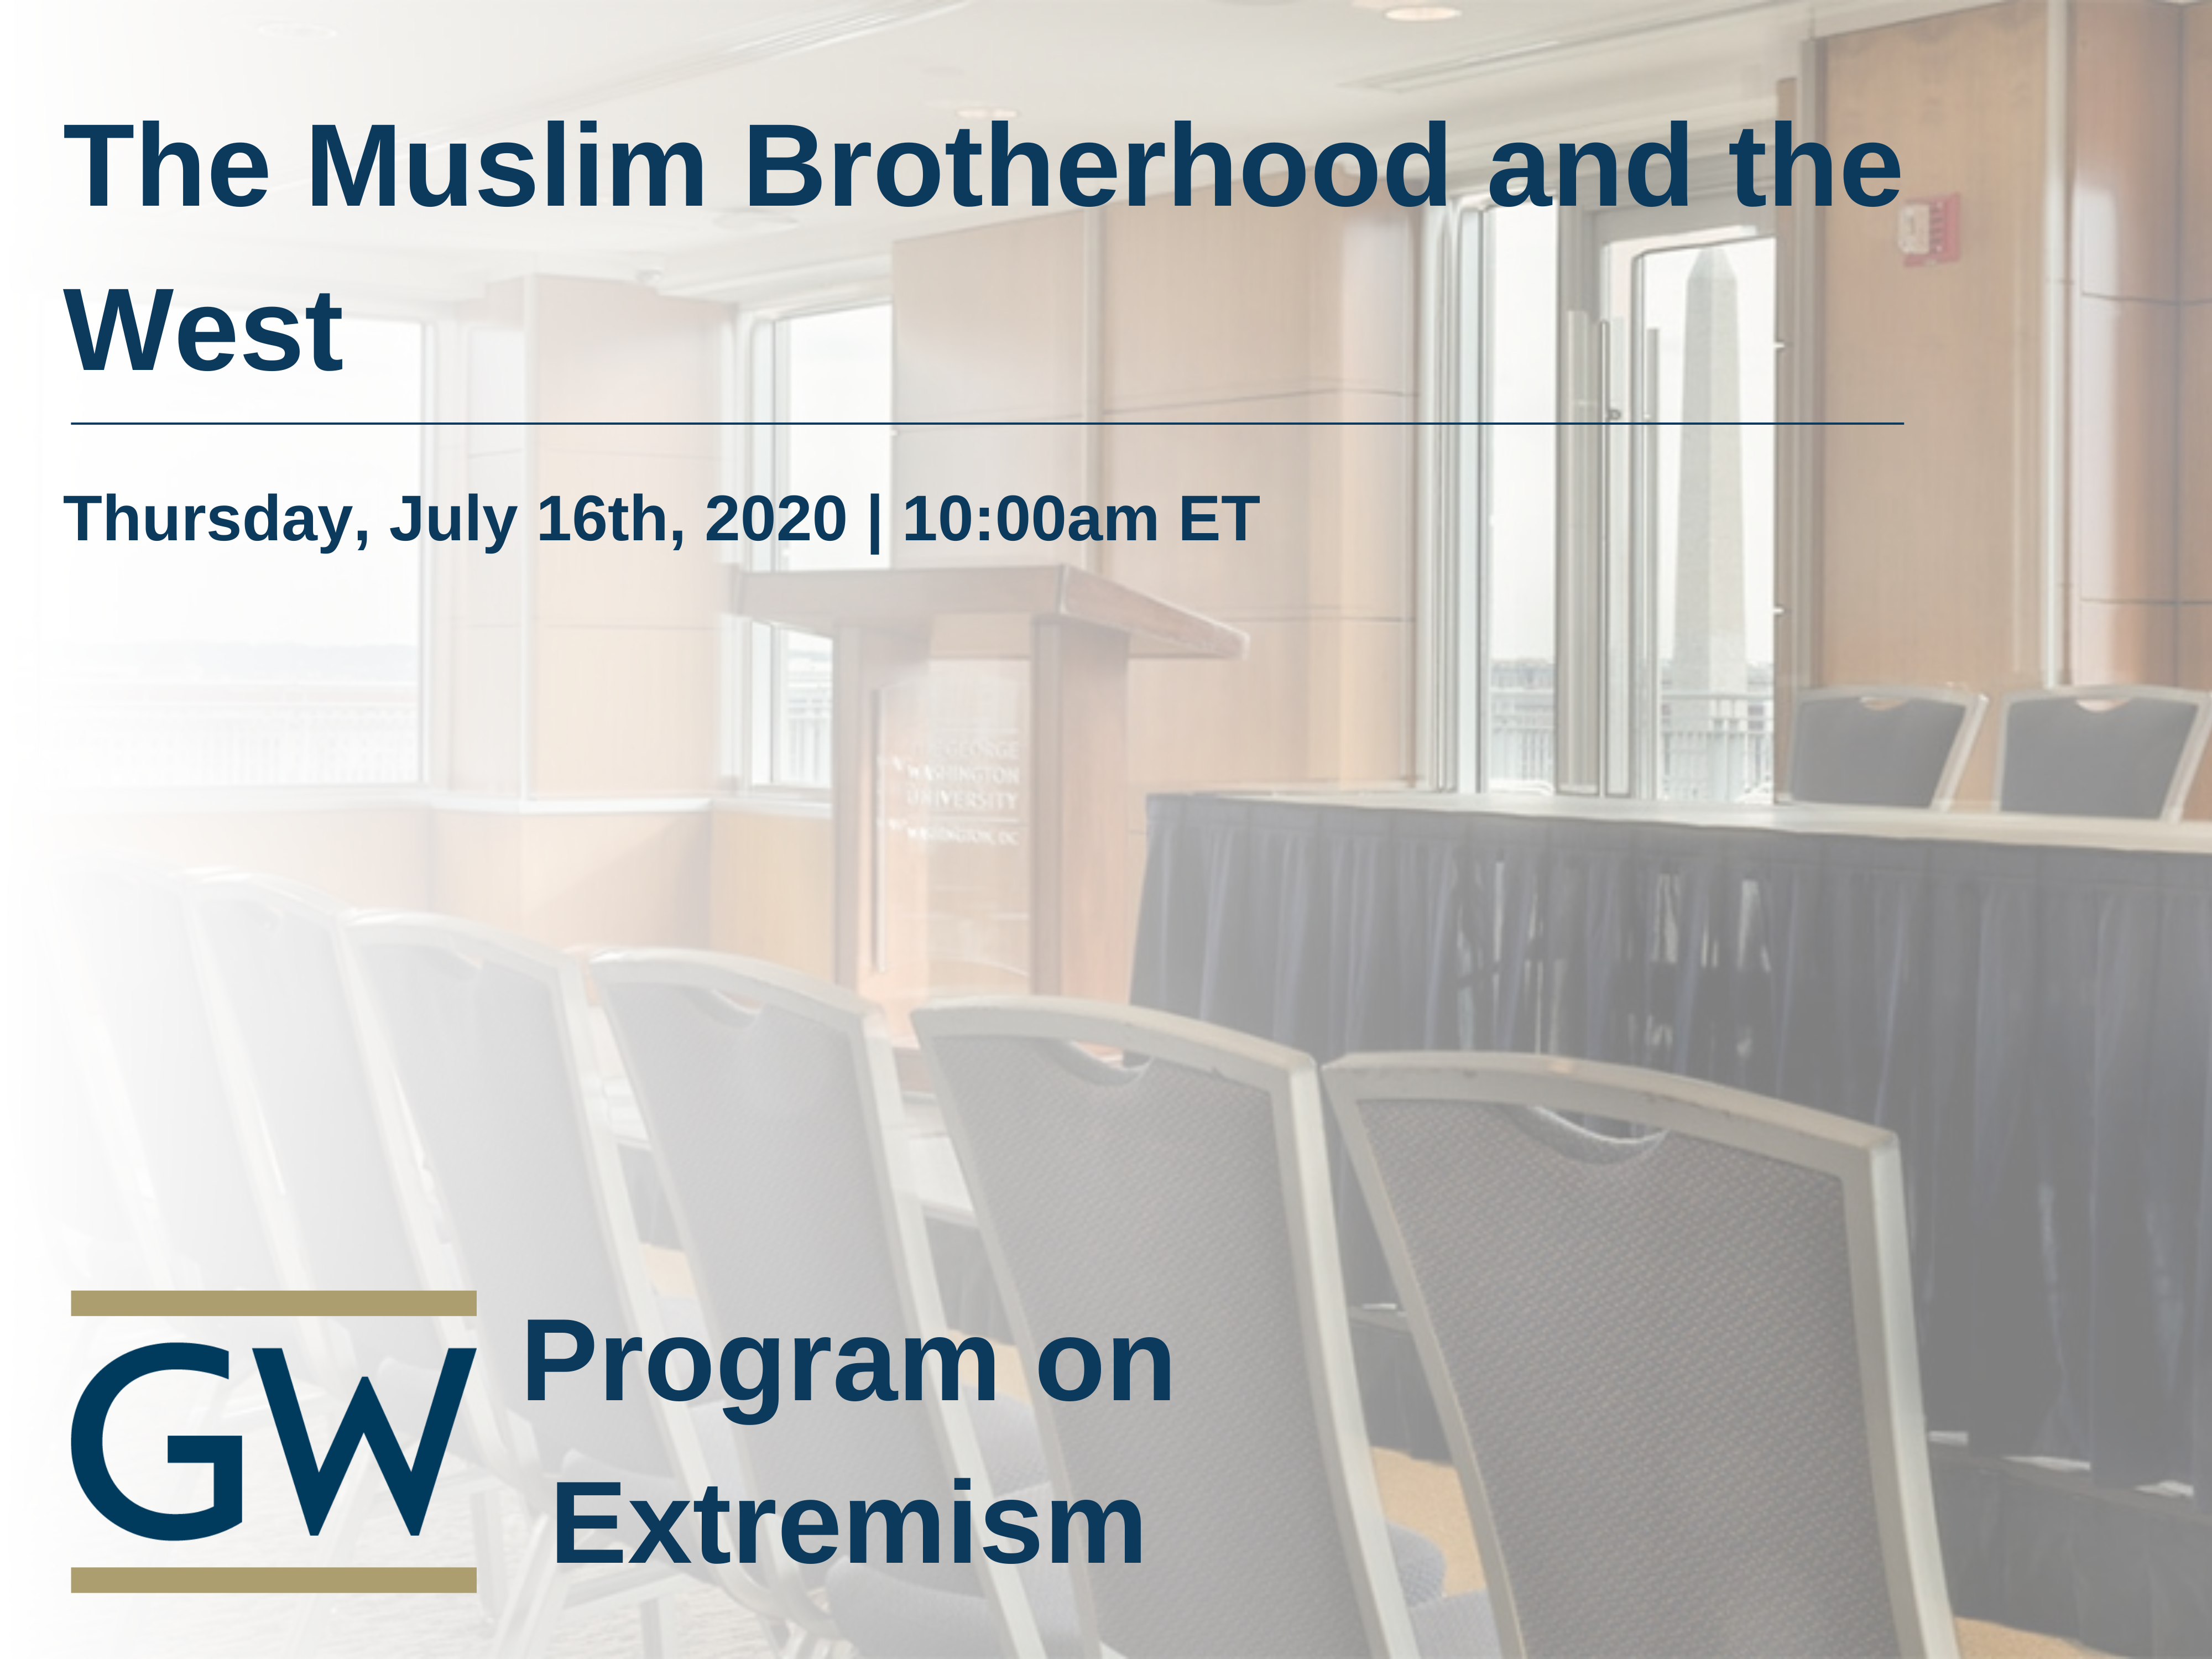 The Muslim Brotherhood and the West Event Banner